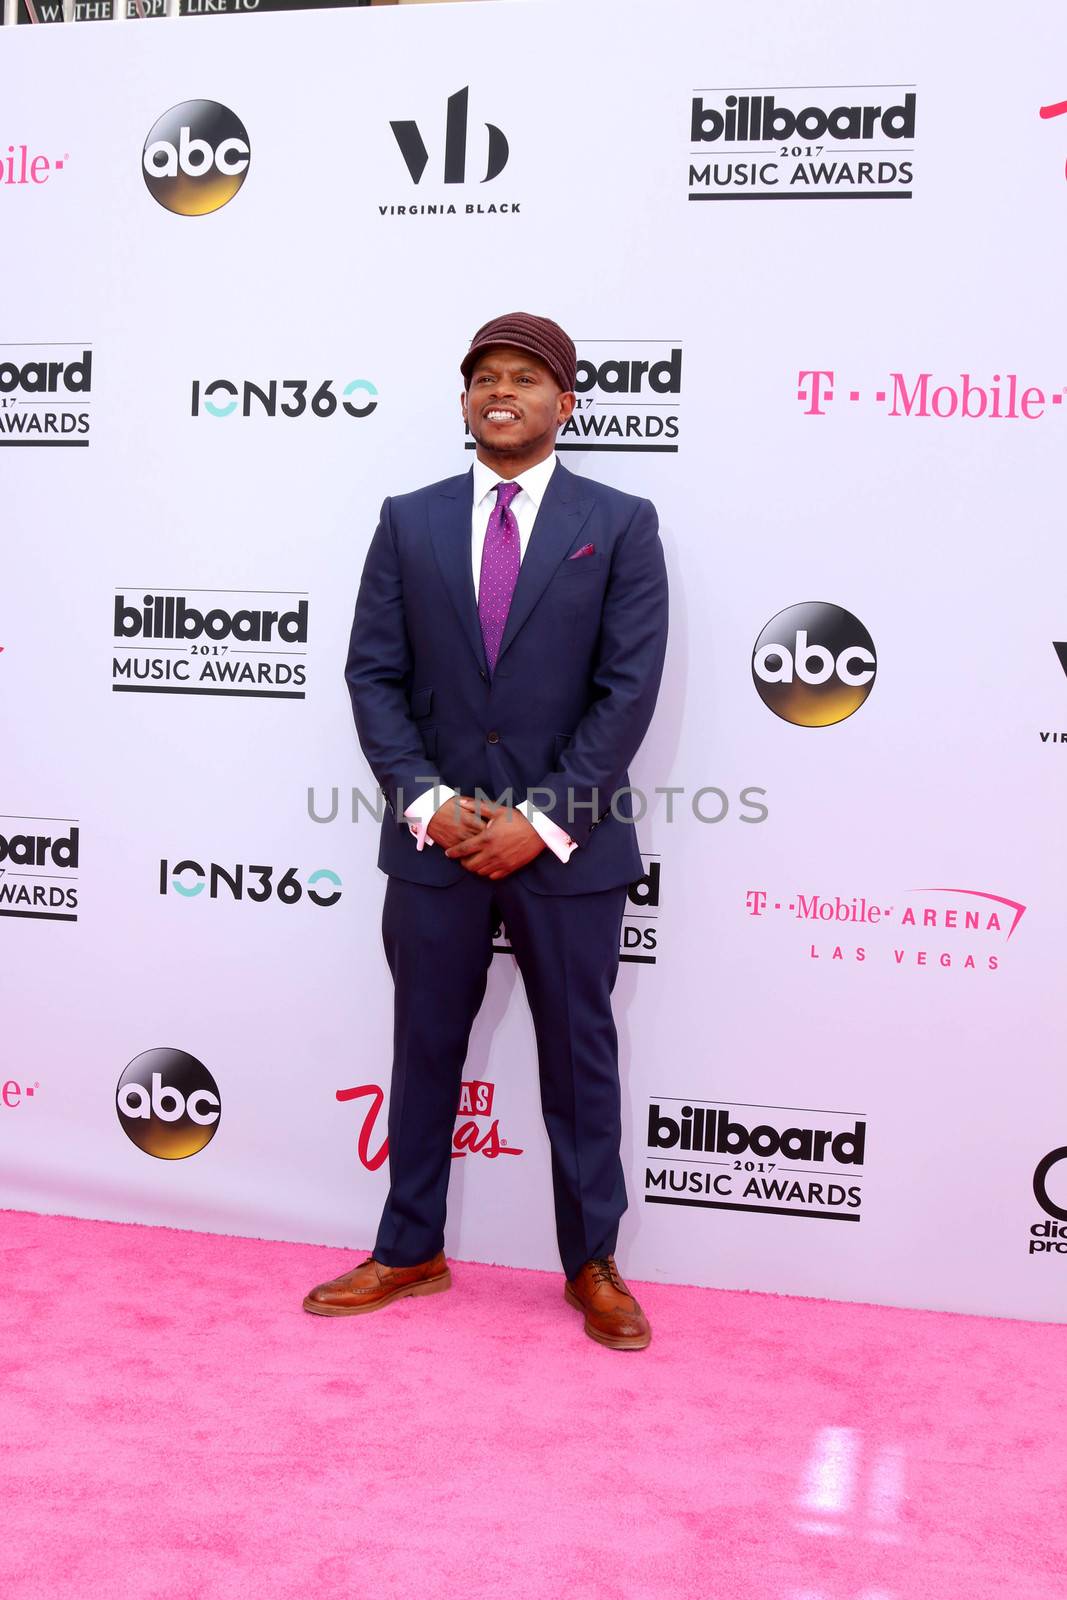 Sway Calloway
at the 2017 Billboard Awards Arrivals, T-Mobile Arena, Las Vegas, NV 05-21-17